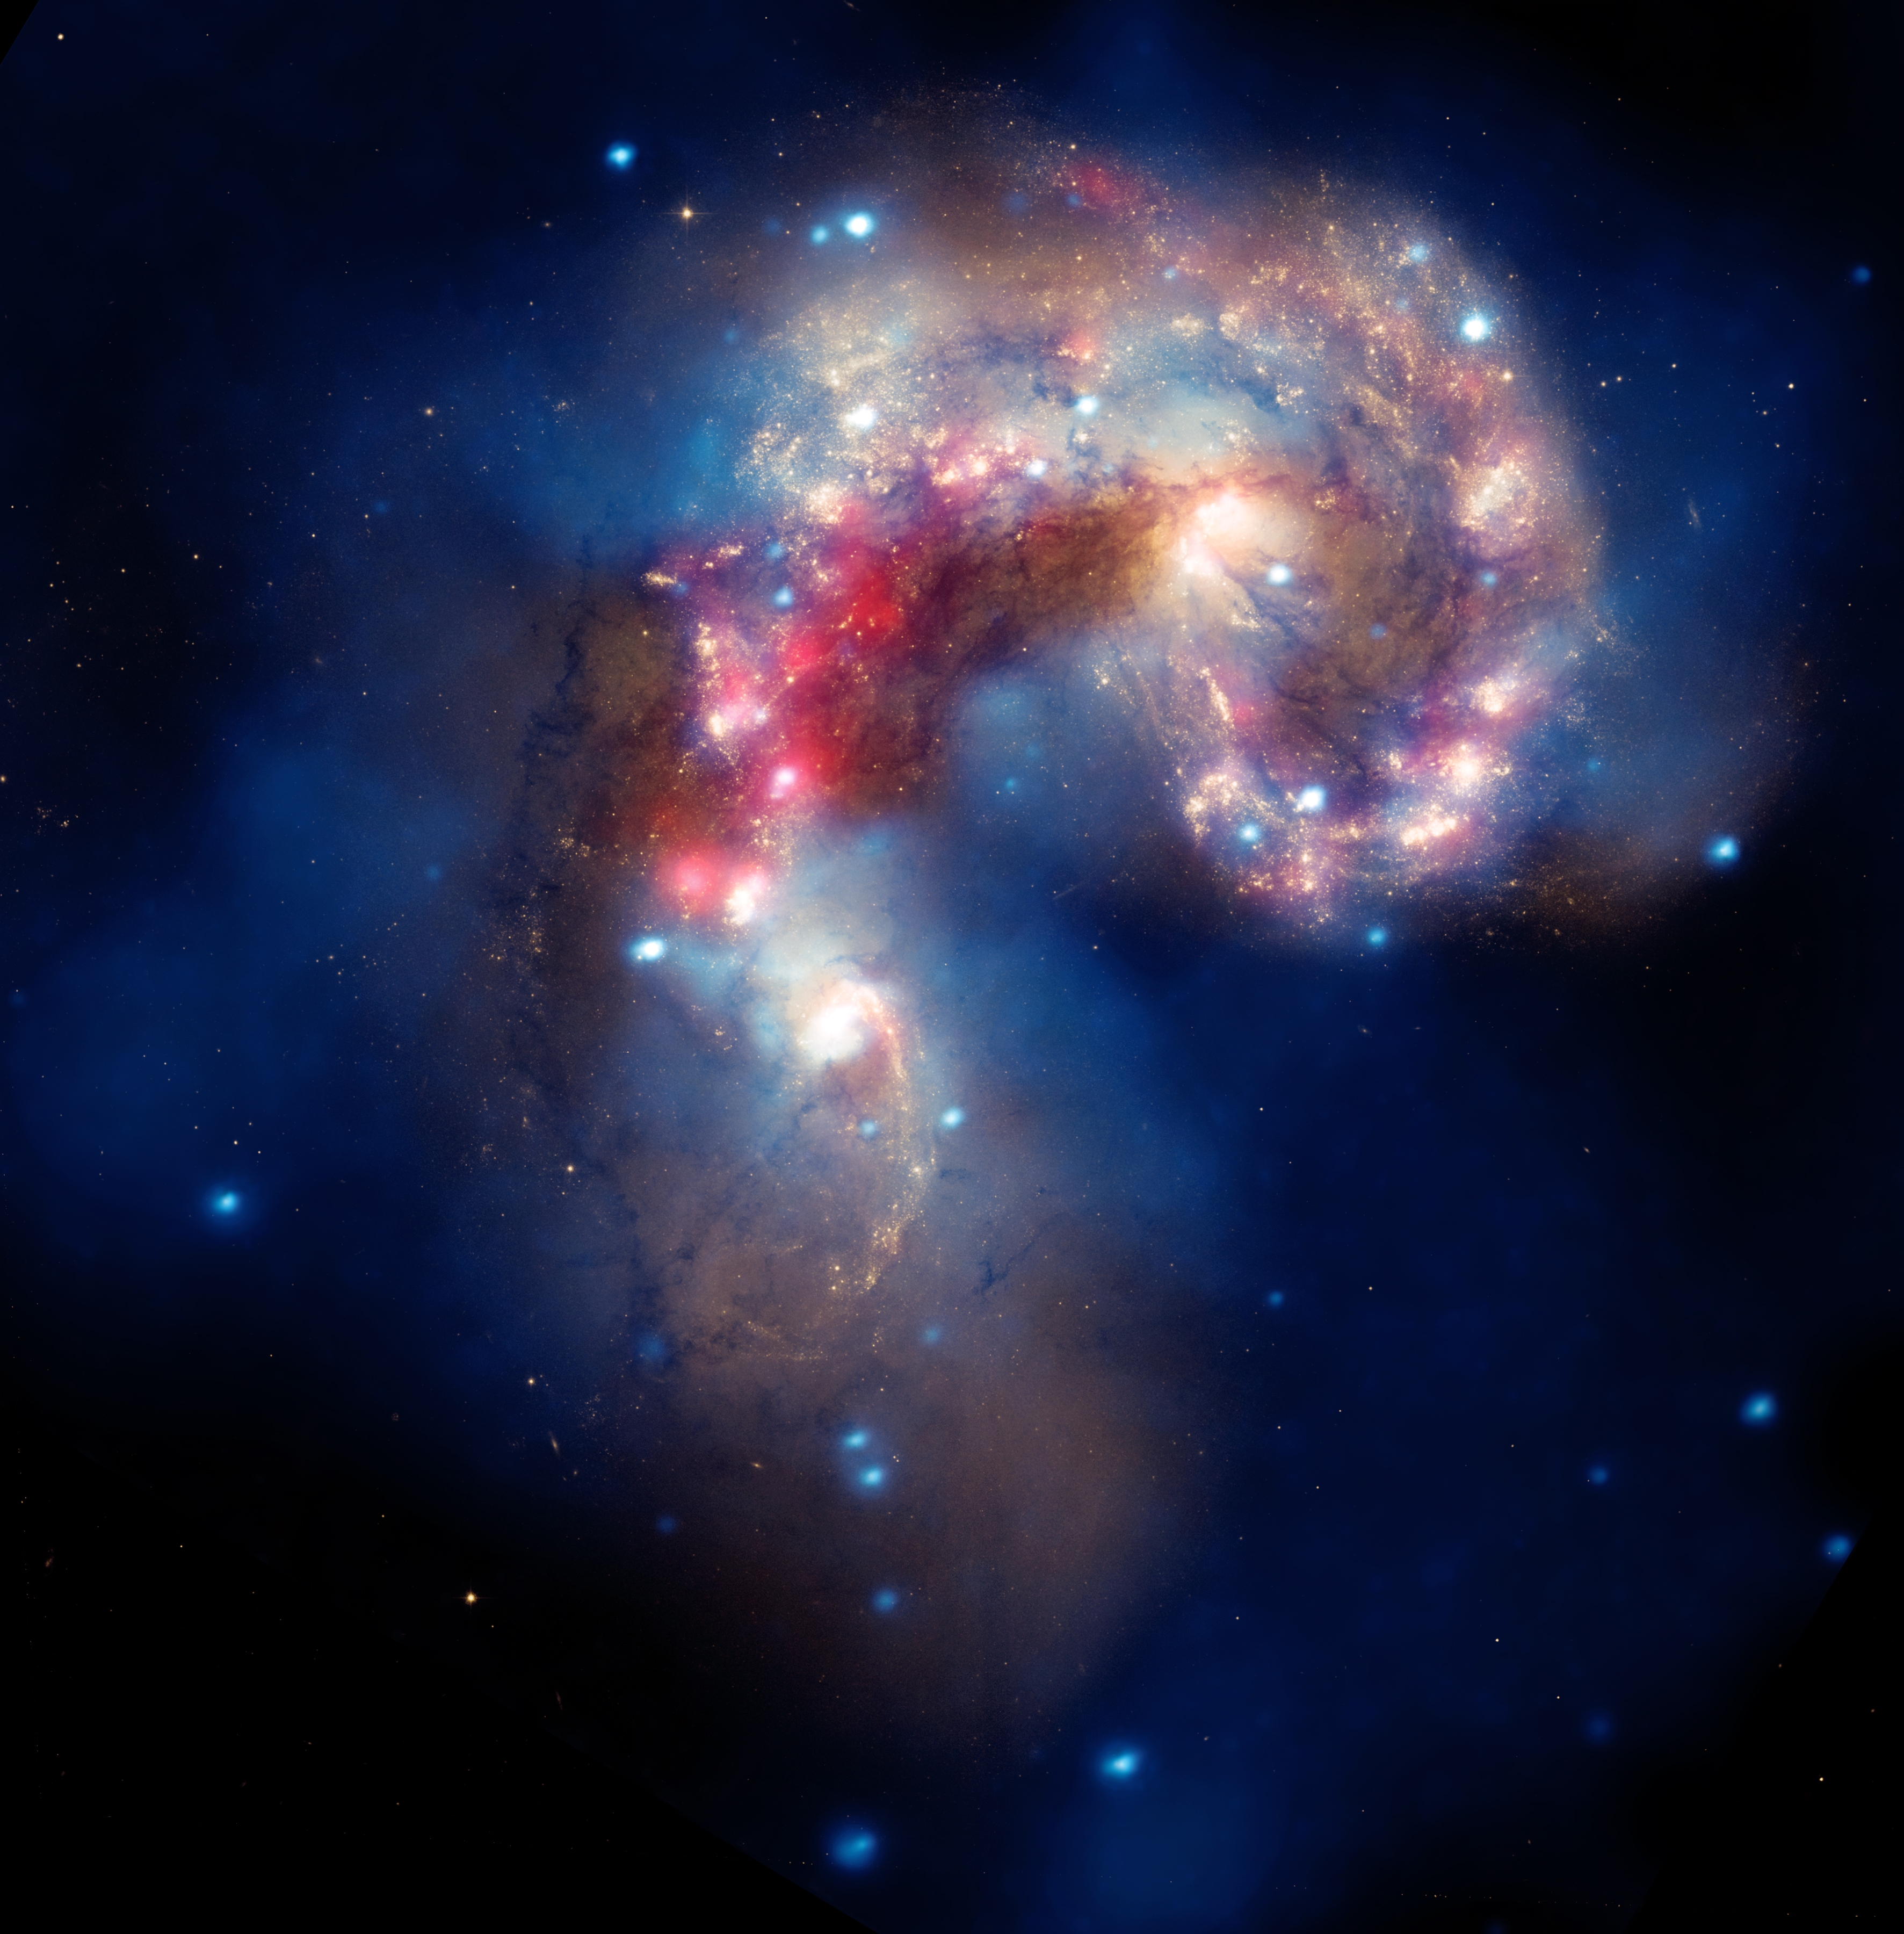 Antennae galaxies (captured by Chandra, Hubble and Spitzer)